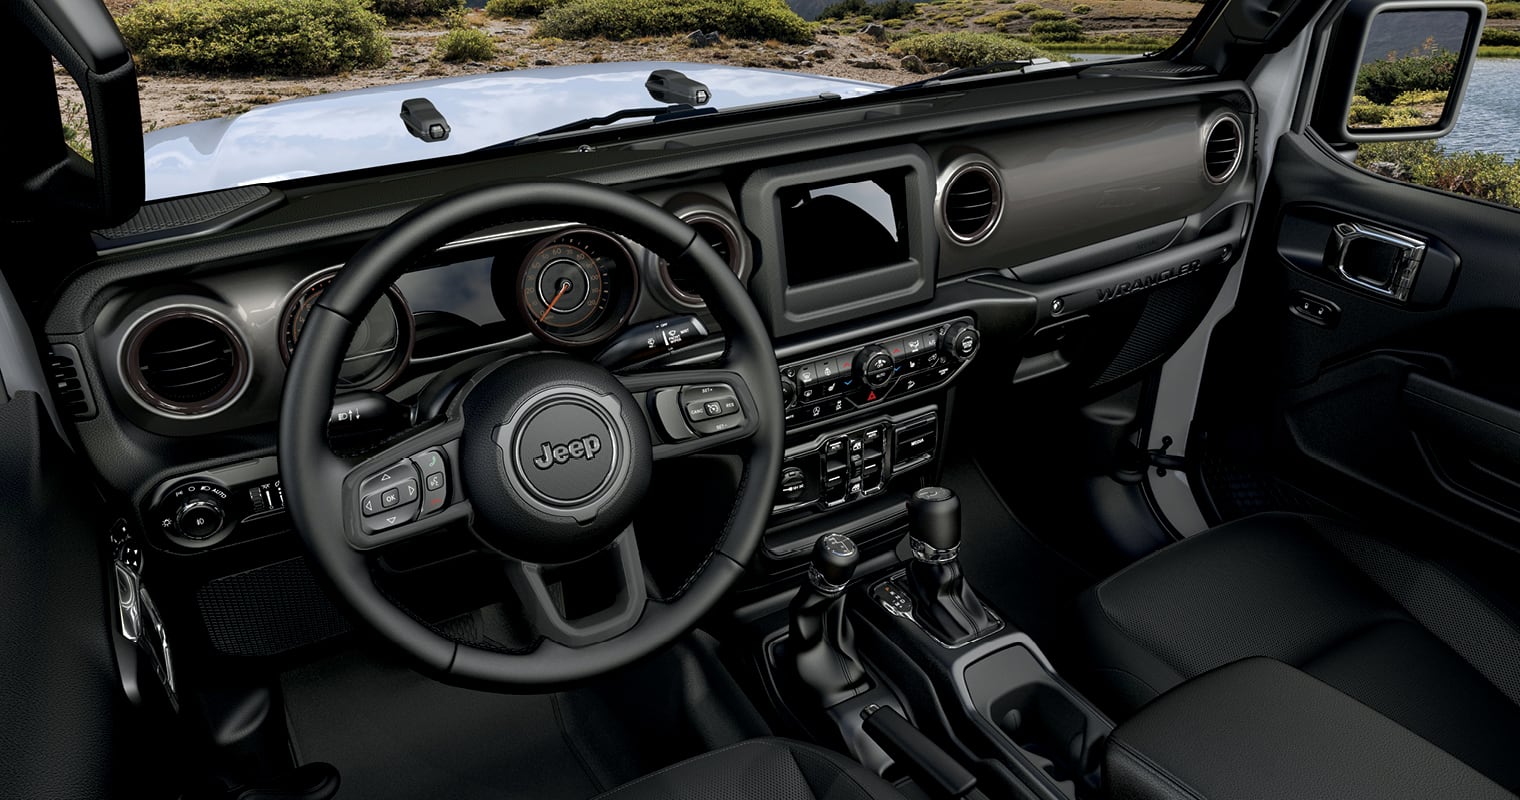 2022 Jeep Wrangler interior dashboard and infotainment